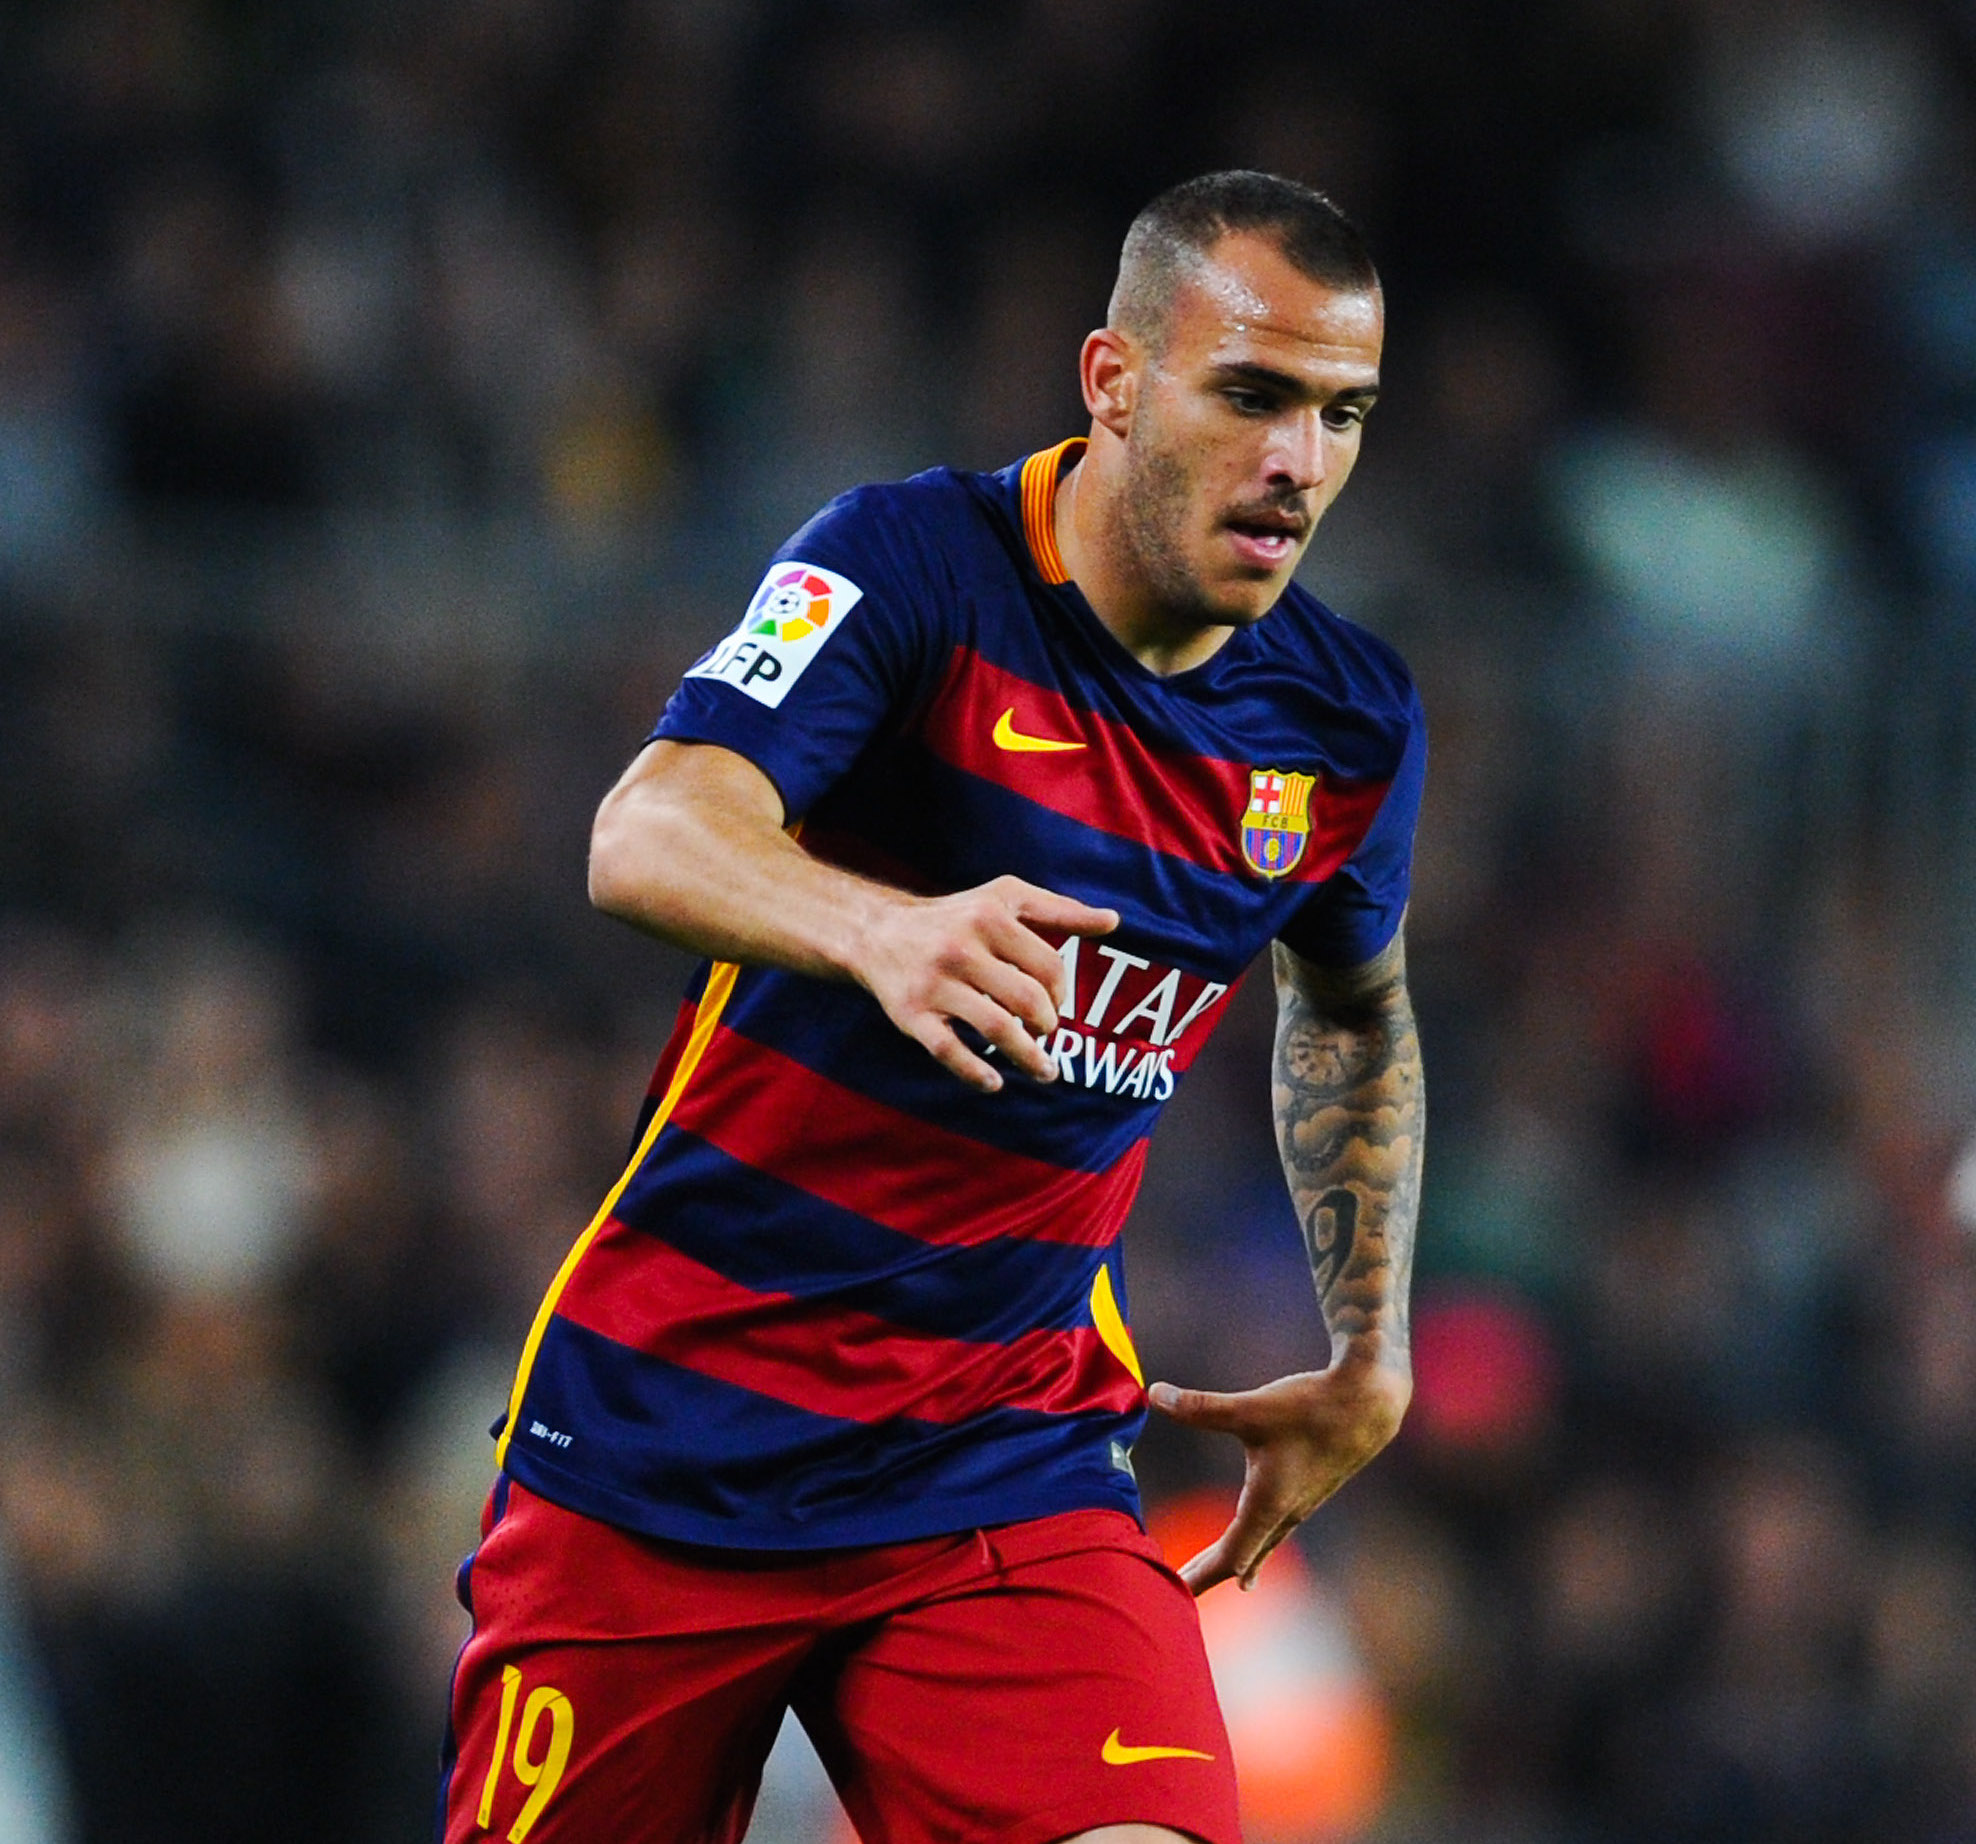 BARCELONA, SPAIN - OCTOBER 17:  Sandro of FC Barcelona runs with the ball during the La Liga match between FC Barcelona and Rayo Vallecano at the Camp Nou stadium on October 17, 2015 in Barcelona, Spain.  (Photo by David Ramos/Getty Images)